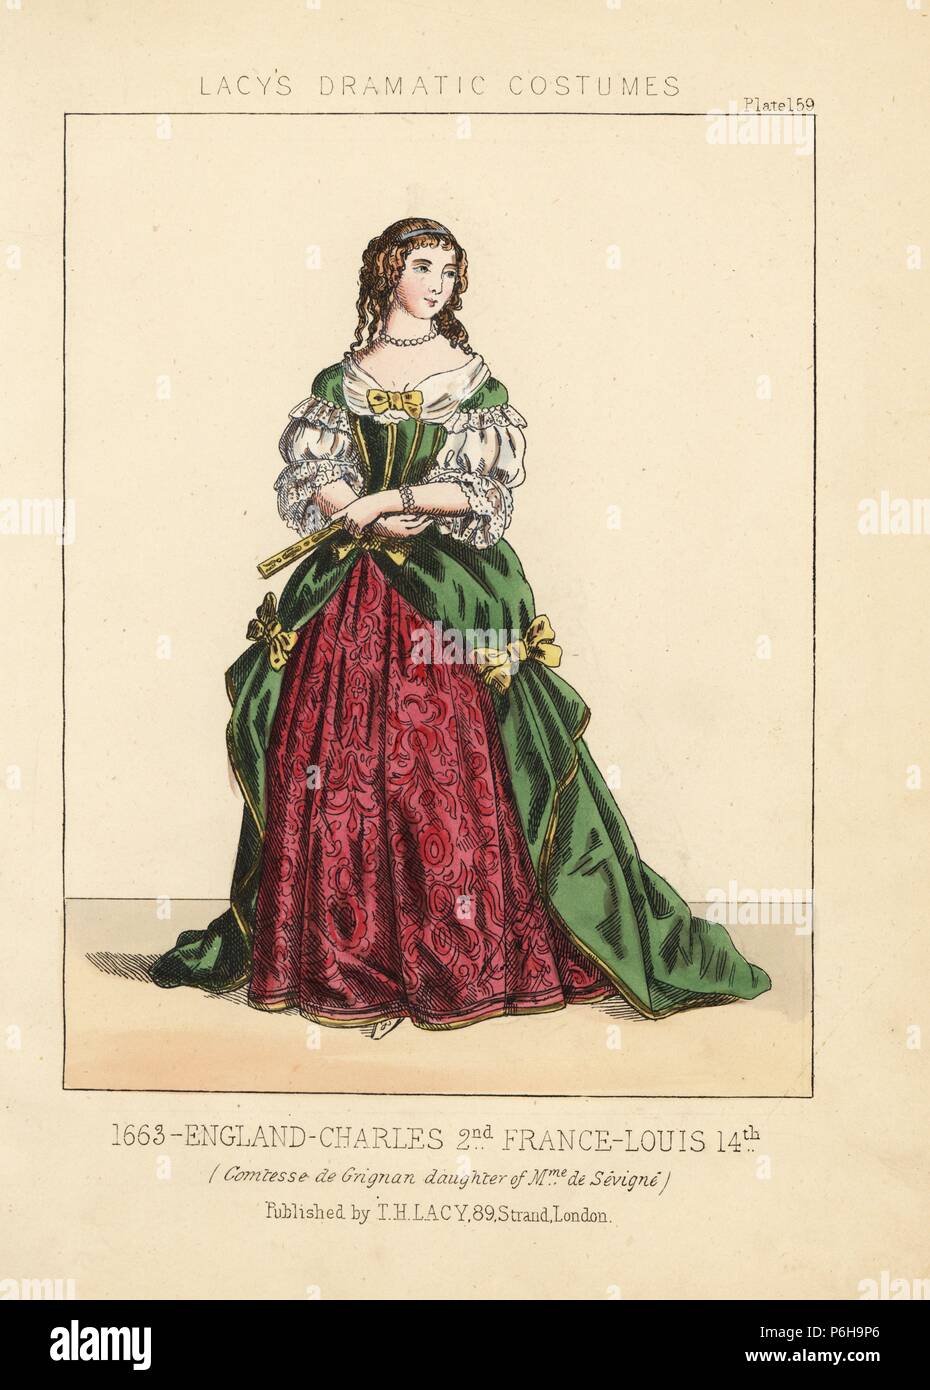 Francoise-Marguerite de Sevigne, Countess of Grignan, daughter of Madame de Sevigne, reign of King Charles II, circa 1663. Handcoloured lithograph from Thomas Hailes Lacy's 'Female Costumes Historical, National and Dramatic in 200 Plates,' London, 1865. Lacy (1809-1873) was a British actor, playwright, theatrical manager and publisher. Stock Photo